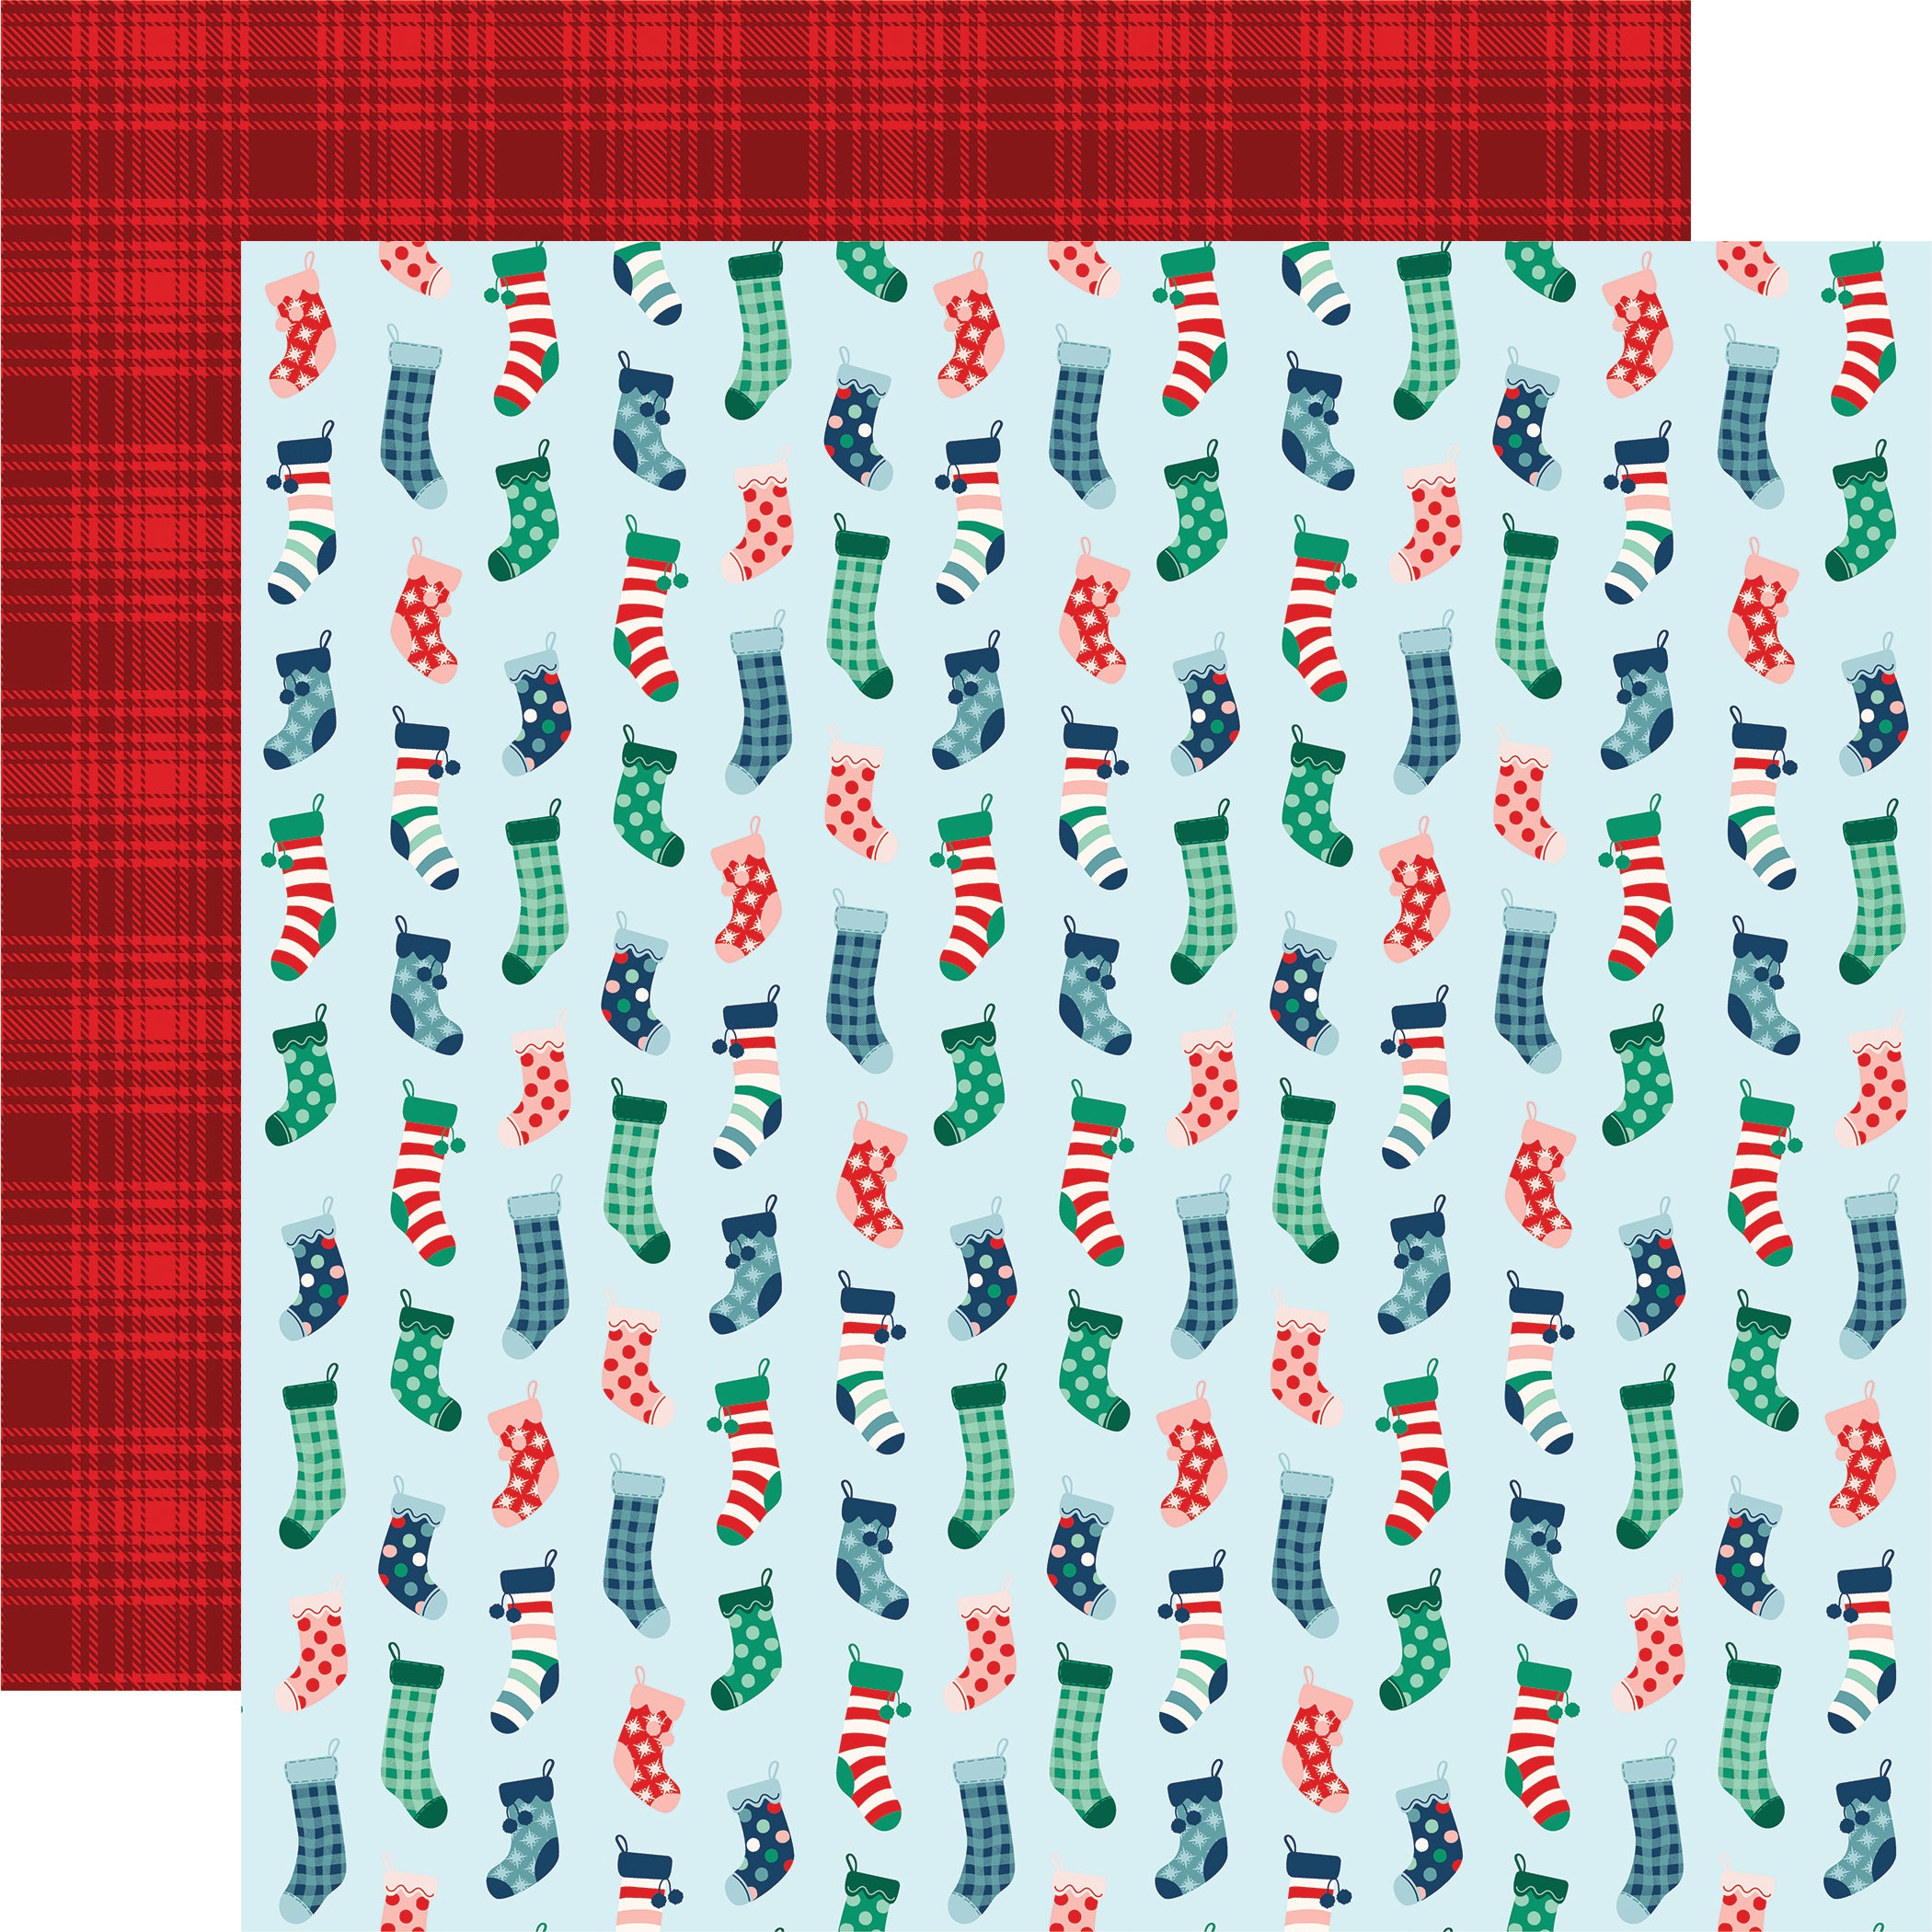 Happy Holidays Collection Christmas Stockings 12 x 12 Double-Sided Scrapbook Paper by Carta Bella